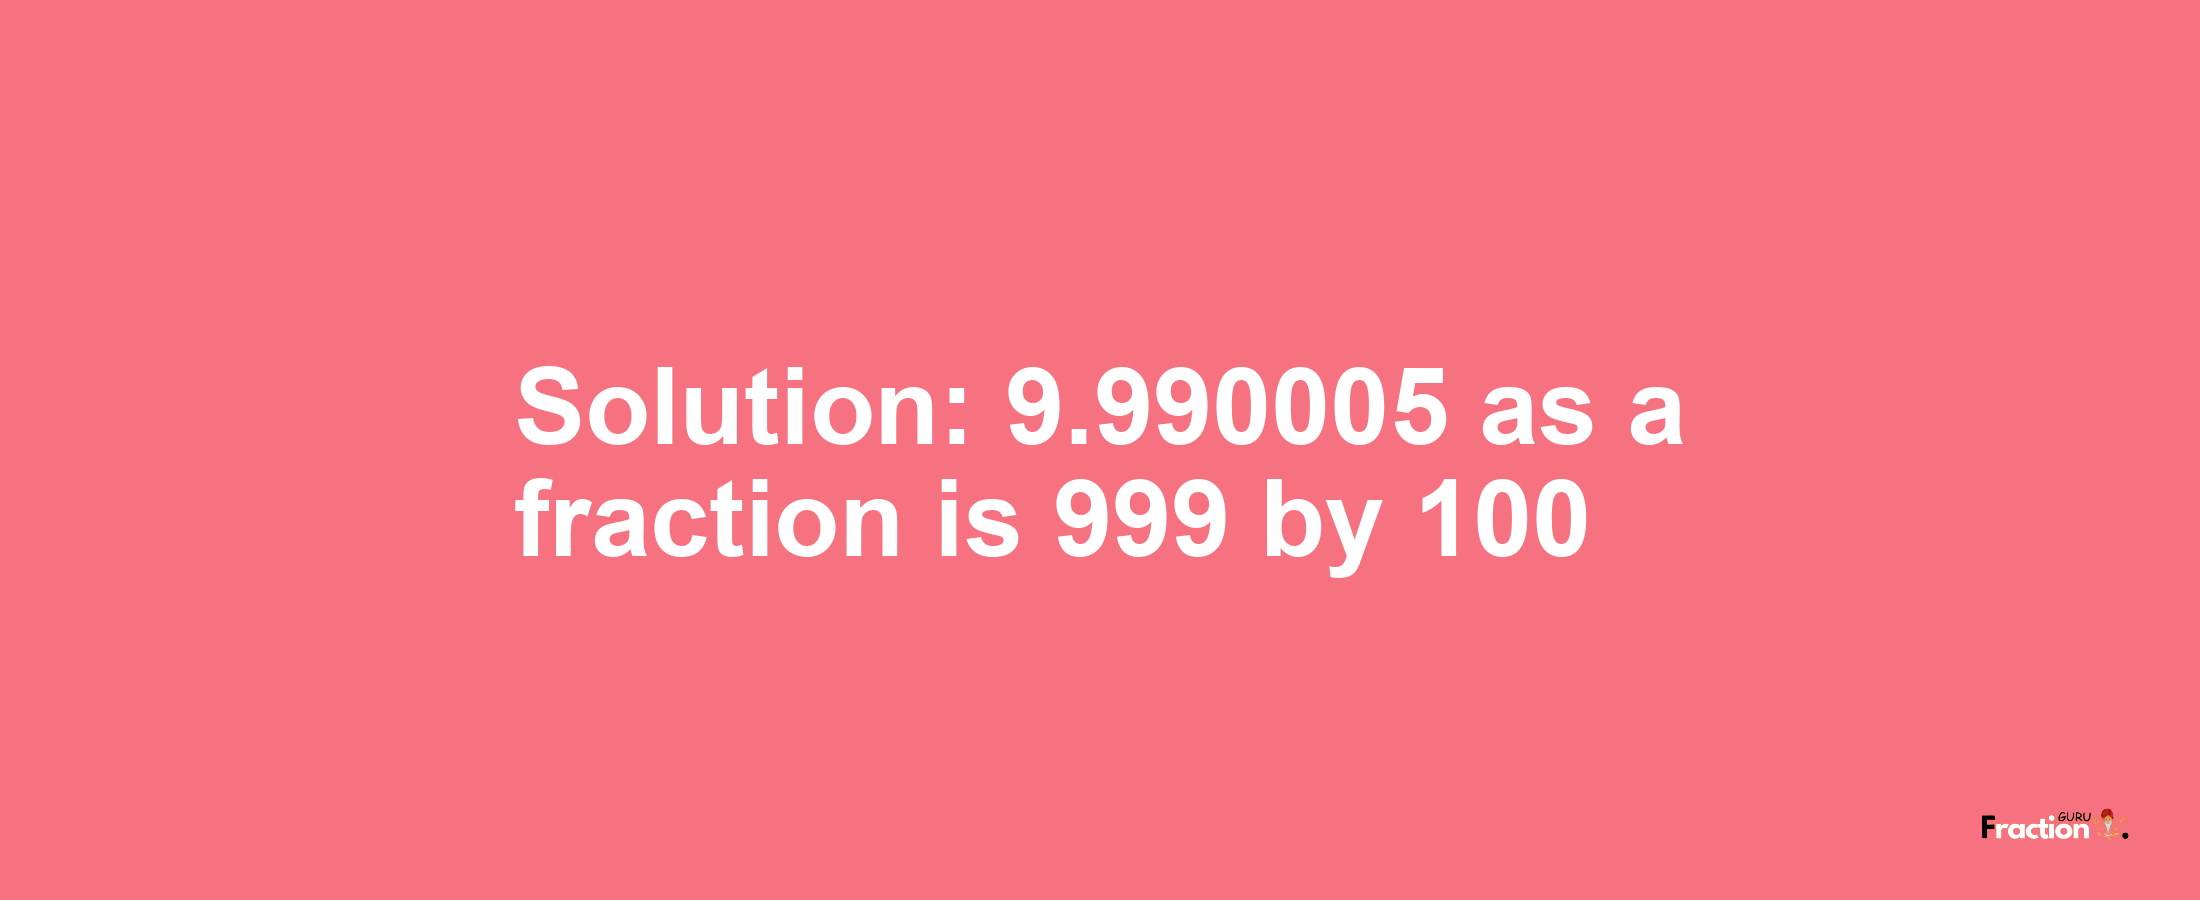 Solution:9.990005 as a fraction is 999/100